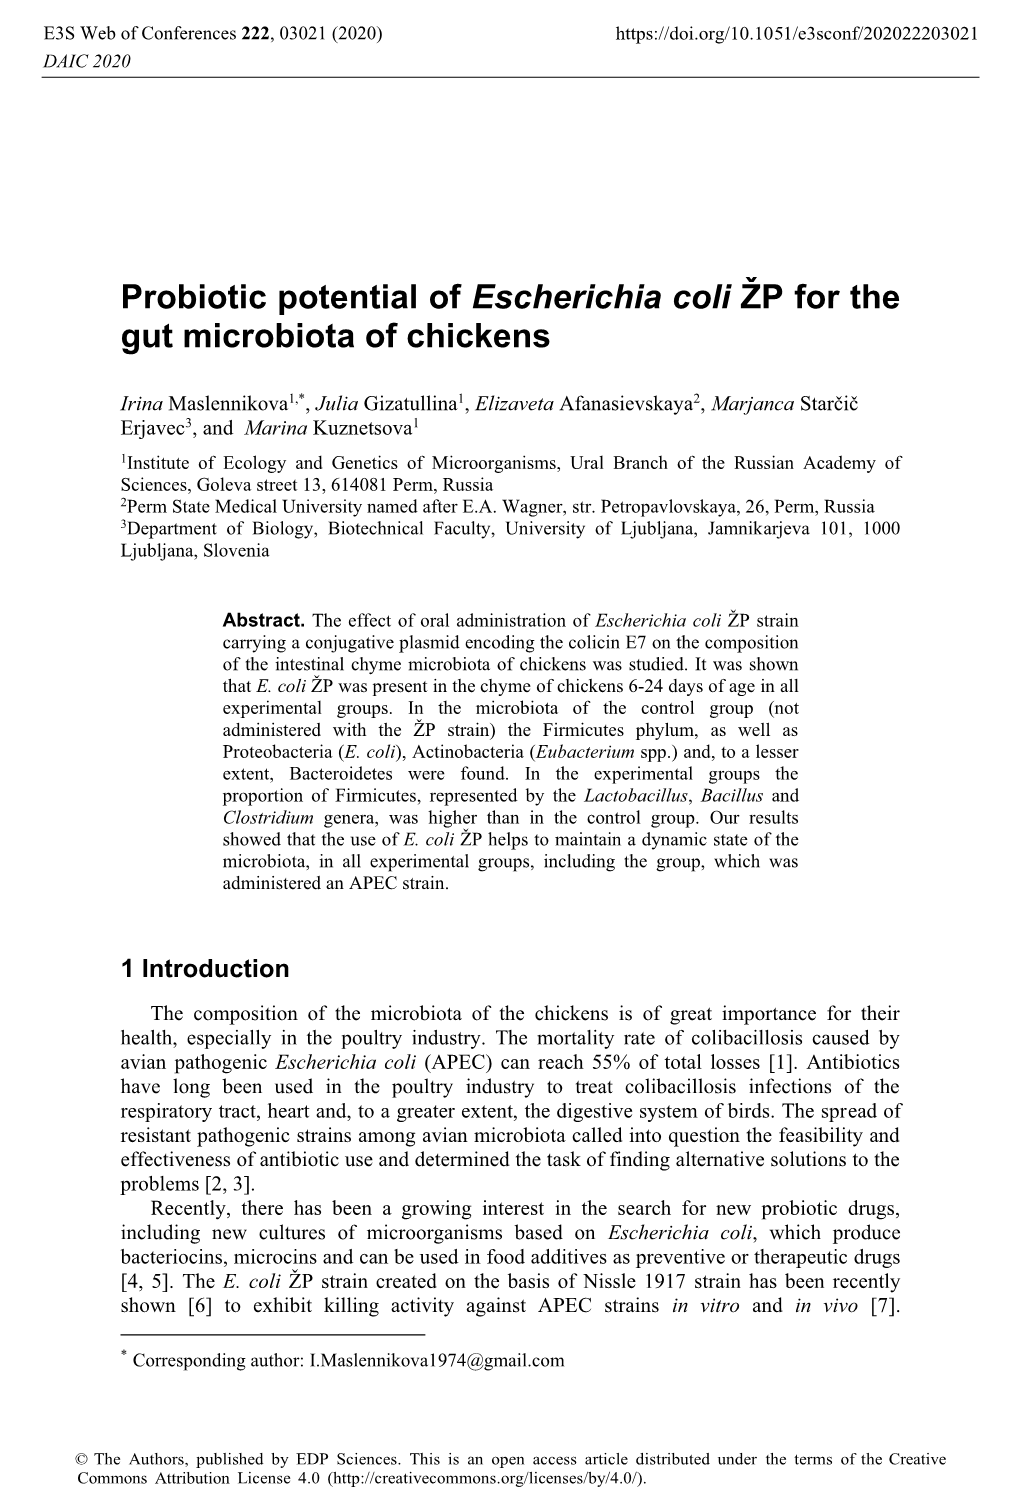 Probiotic Potential of Escherichia Coli ŽP for the Gut Microbiota of Chickens